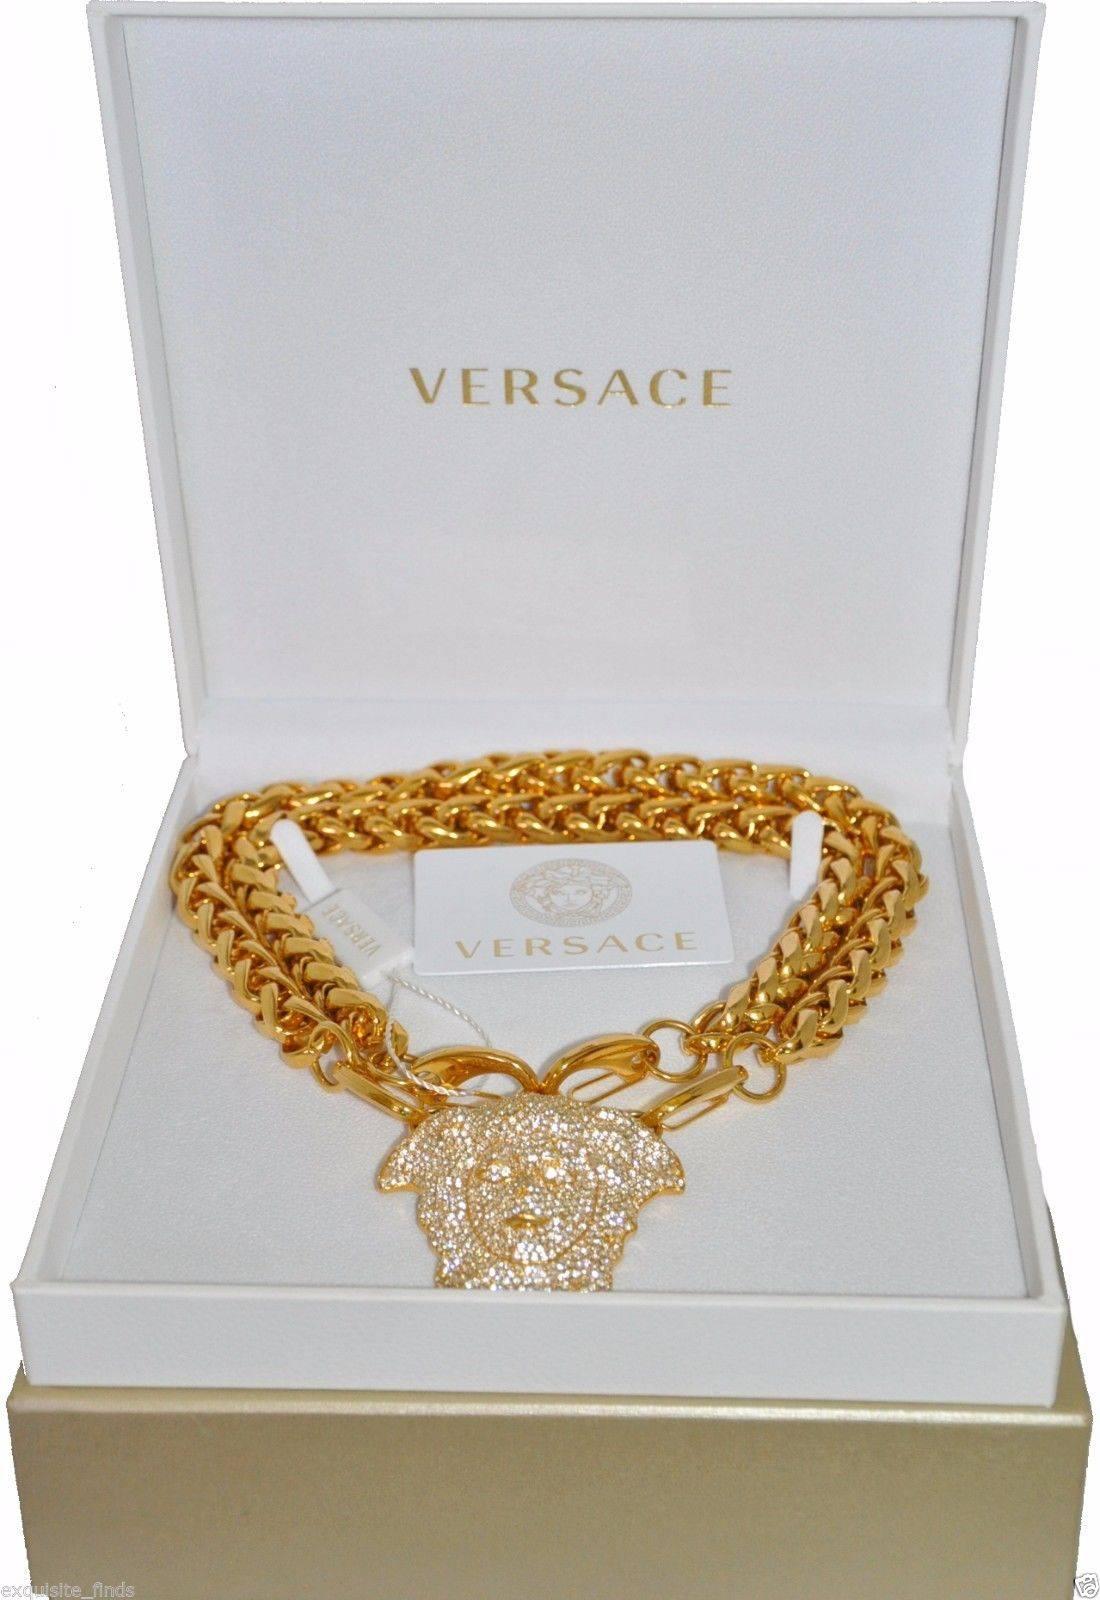   VERSACE

  
VERSACE GOLD DOUBLE CHAIN NECKLACE WITH CRYSTAL EMBELLISHED MEDUSA

This beautiful and luxurious accessory is an instant classic.

Gold plated

Display Model. Minor scratches.